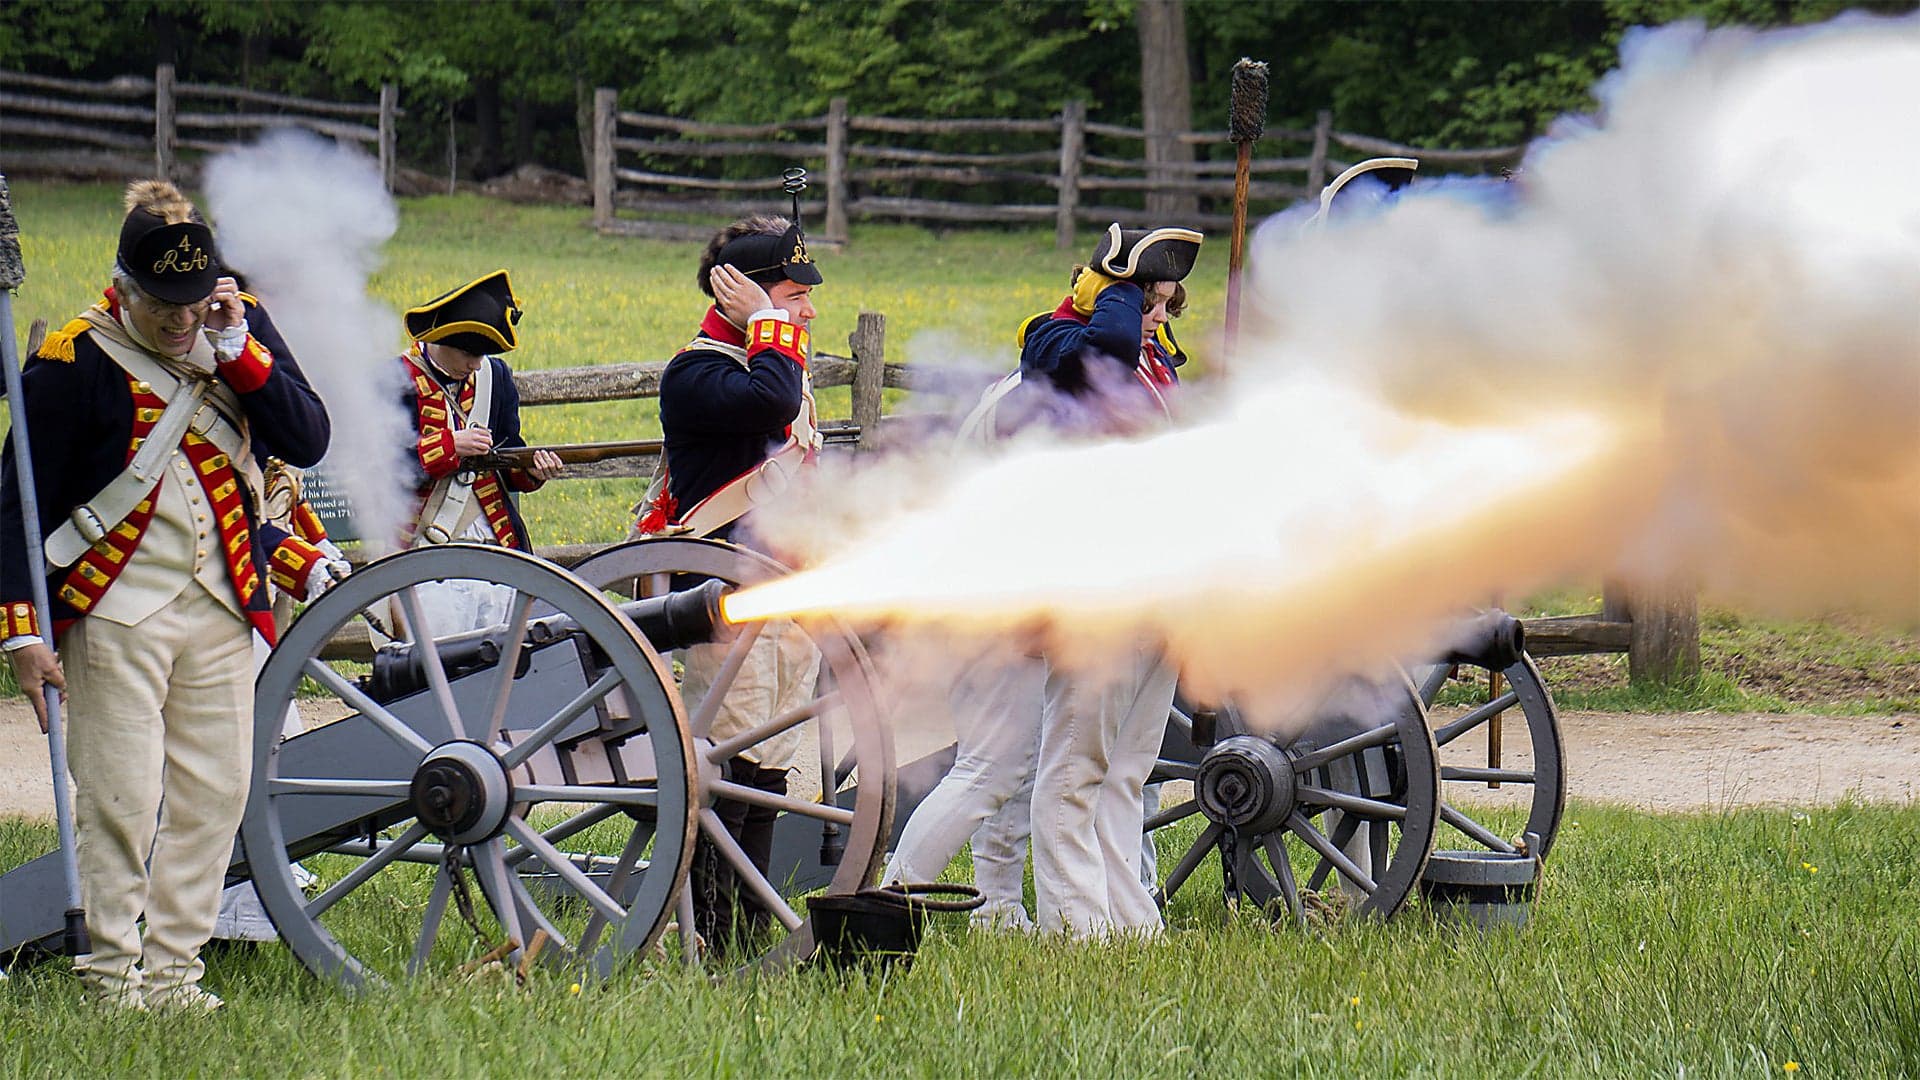 Get To Know The Brutal Artillery Of The Revolutionary War